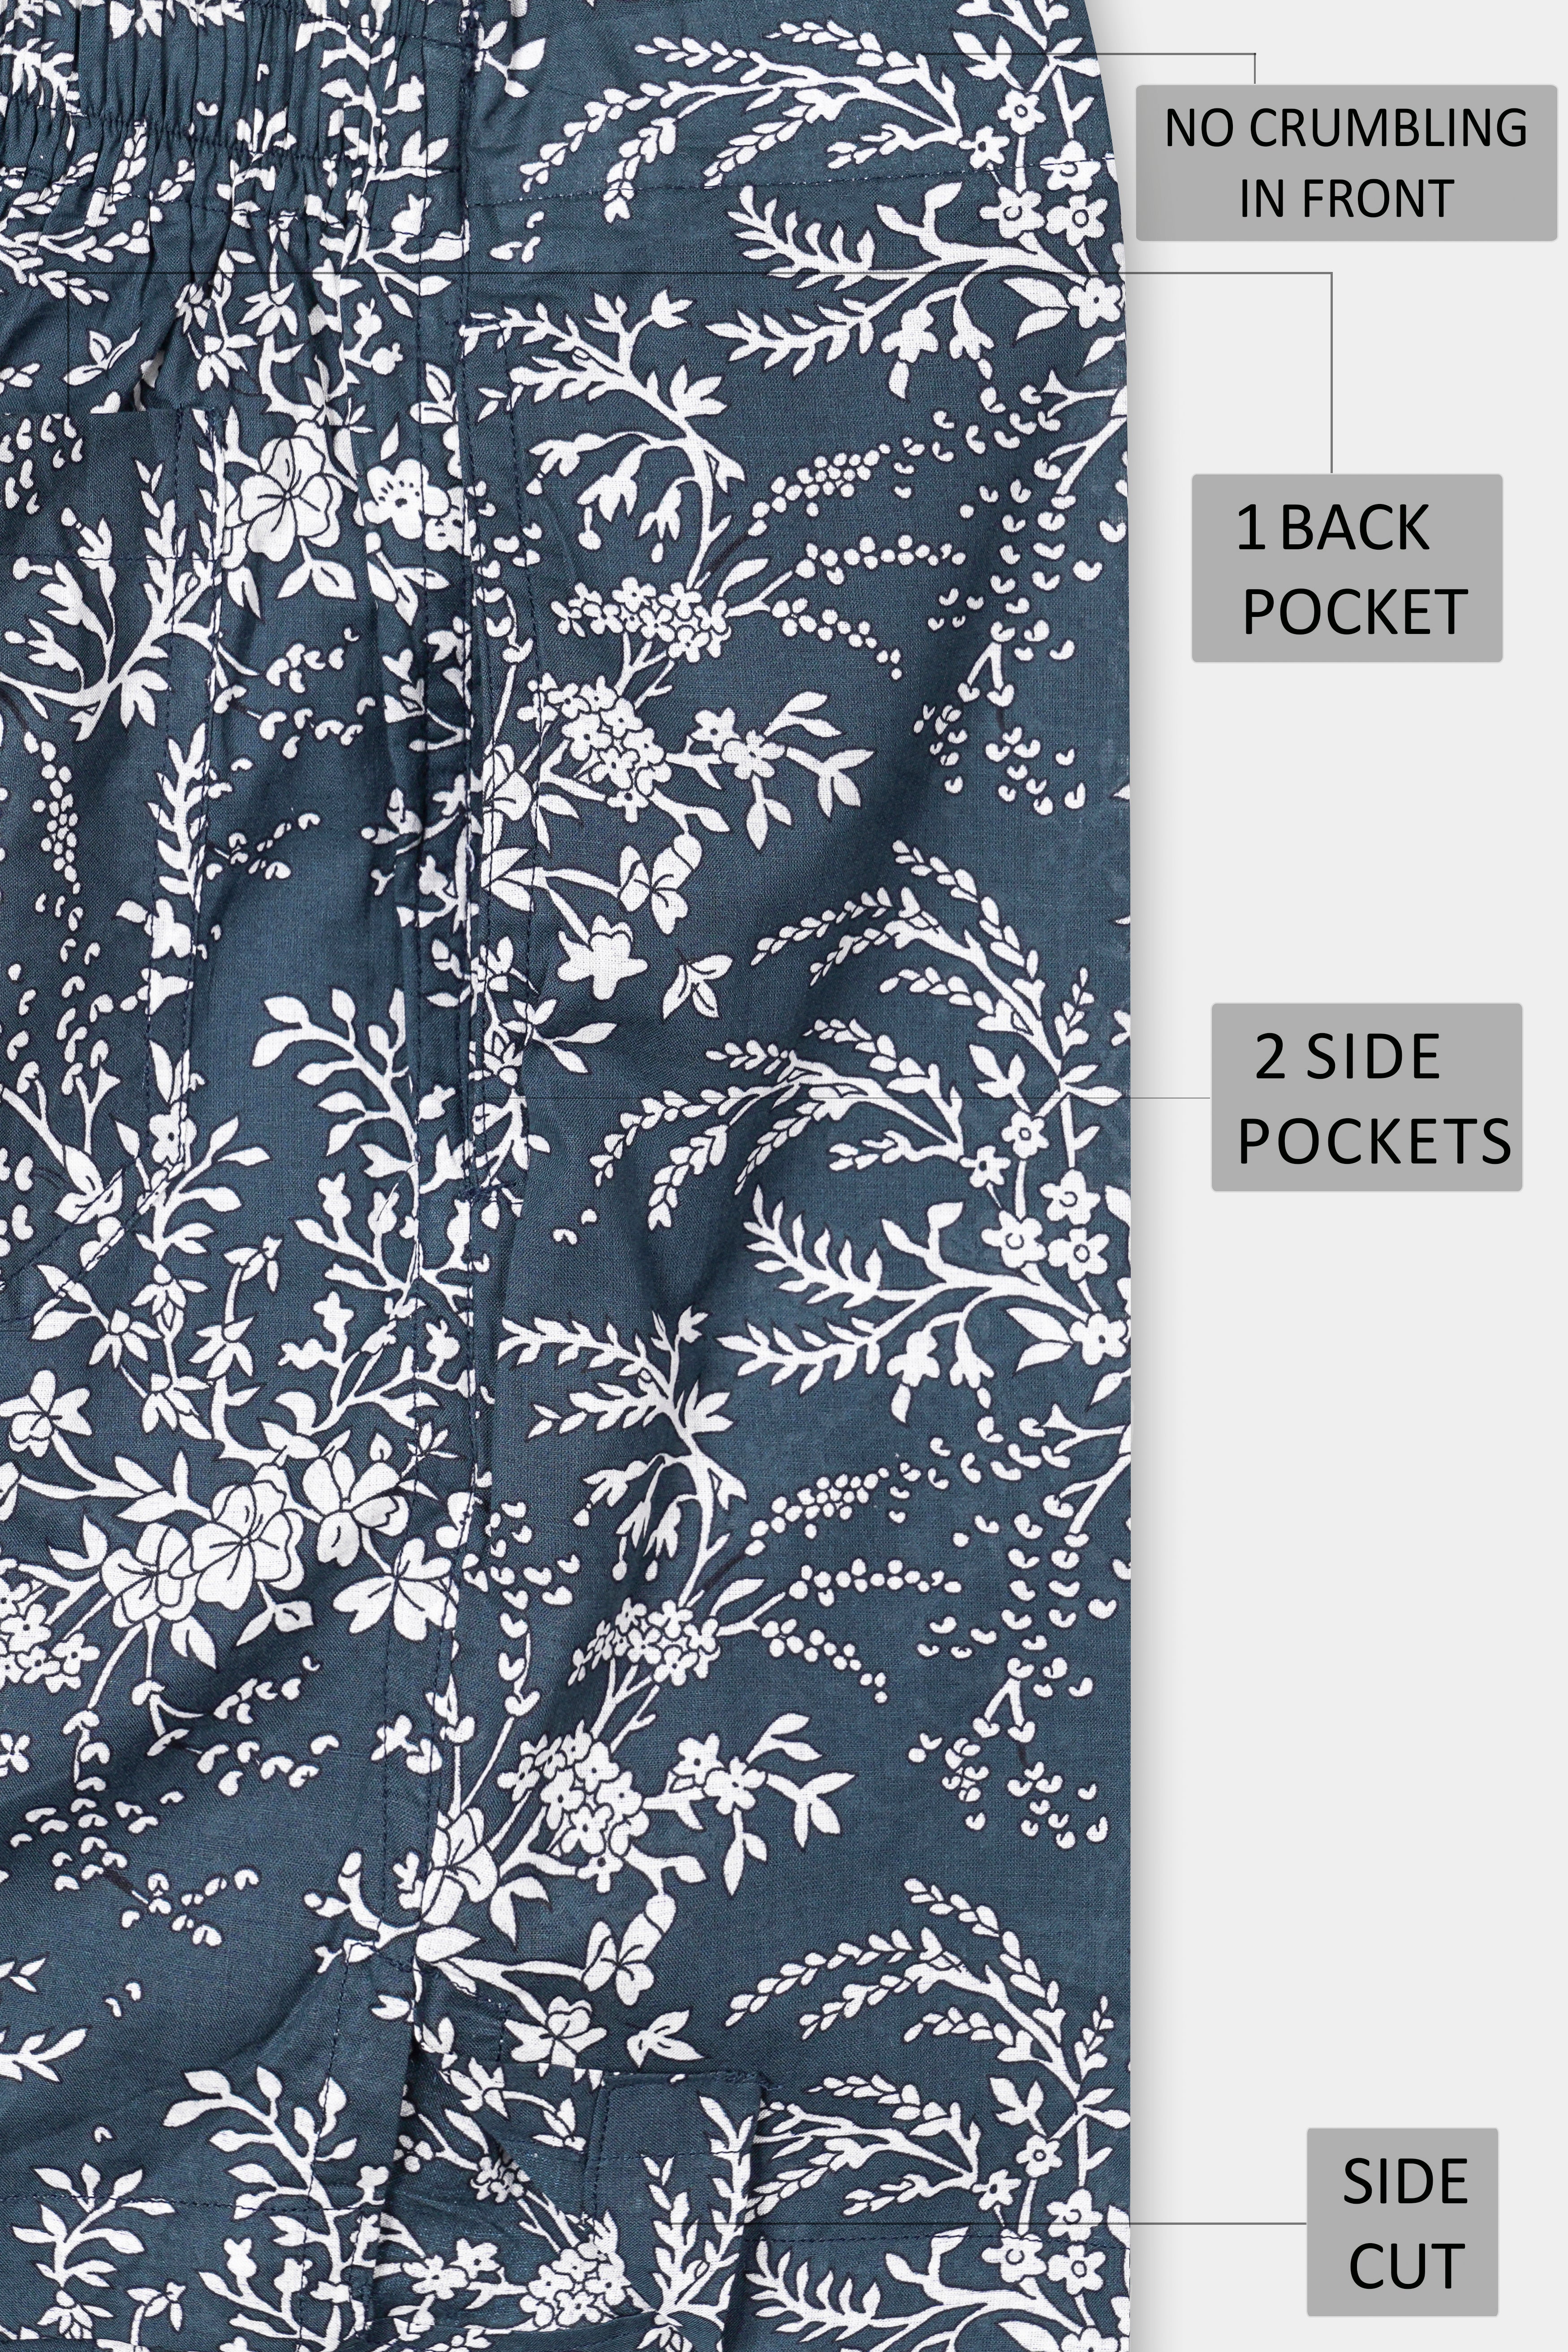 Limed Spruce Blue With White Flower Printed Premium Cotton Boxer BX534-28, BX534-30, BX534-32, BX534-34, BX534-36, BX534-38, BX534-40, BX534-42, BX534-44